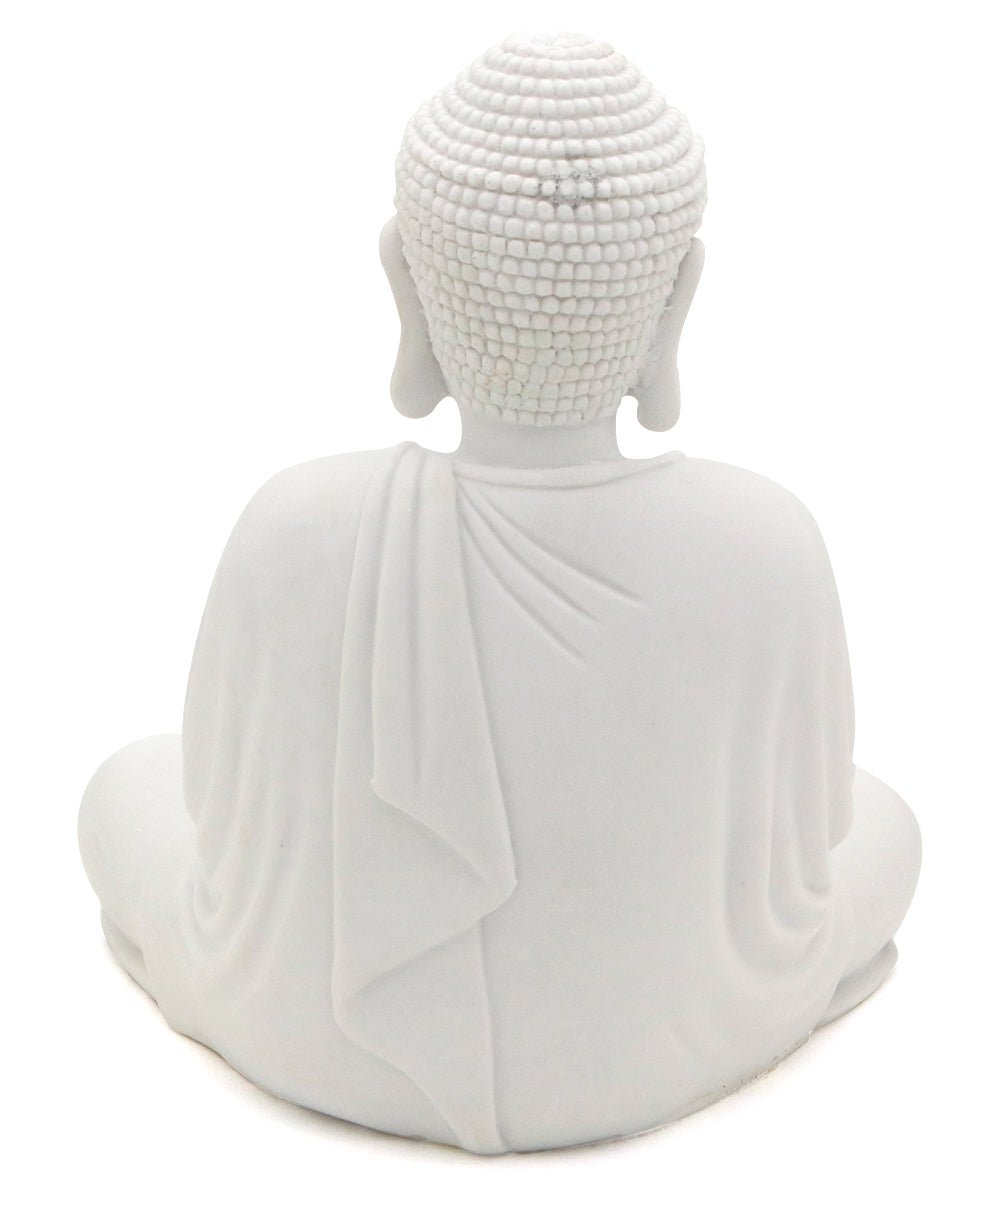 Serene White Buddha Statue, Indoor Outdoor use - Sculptures & Statues